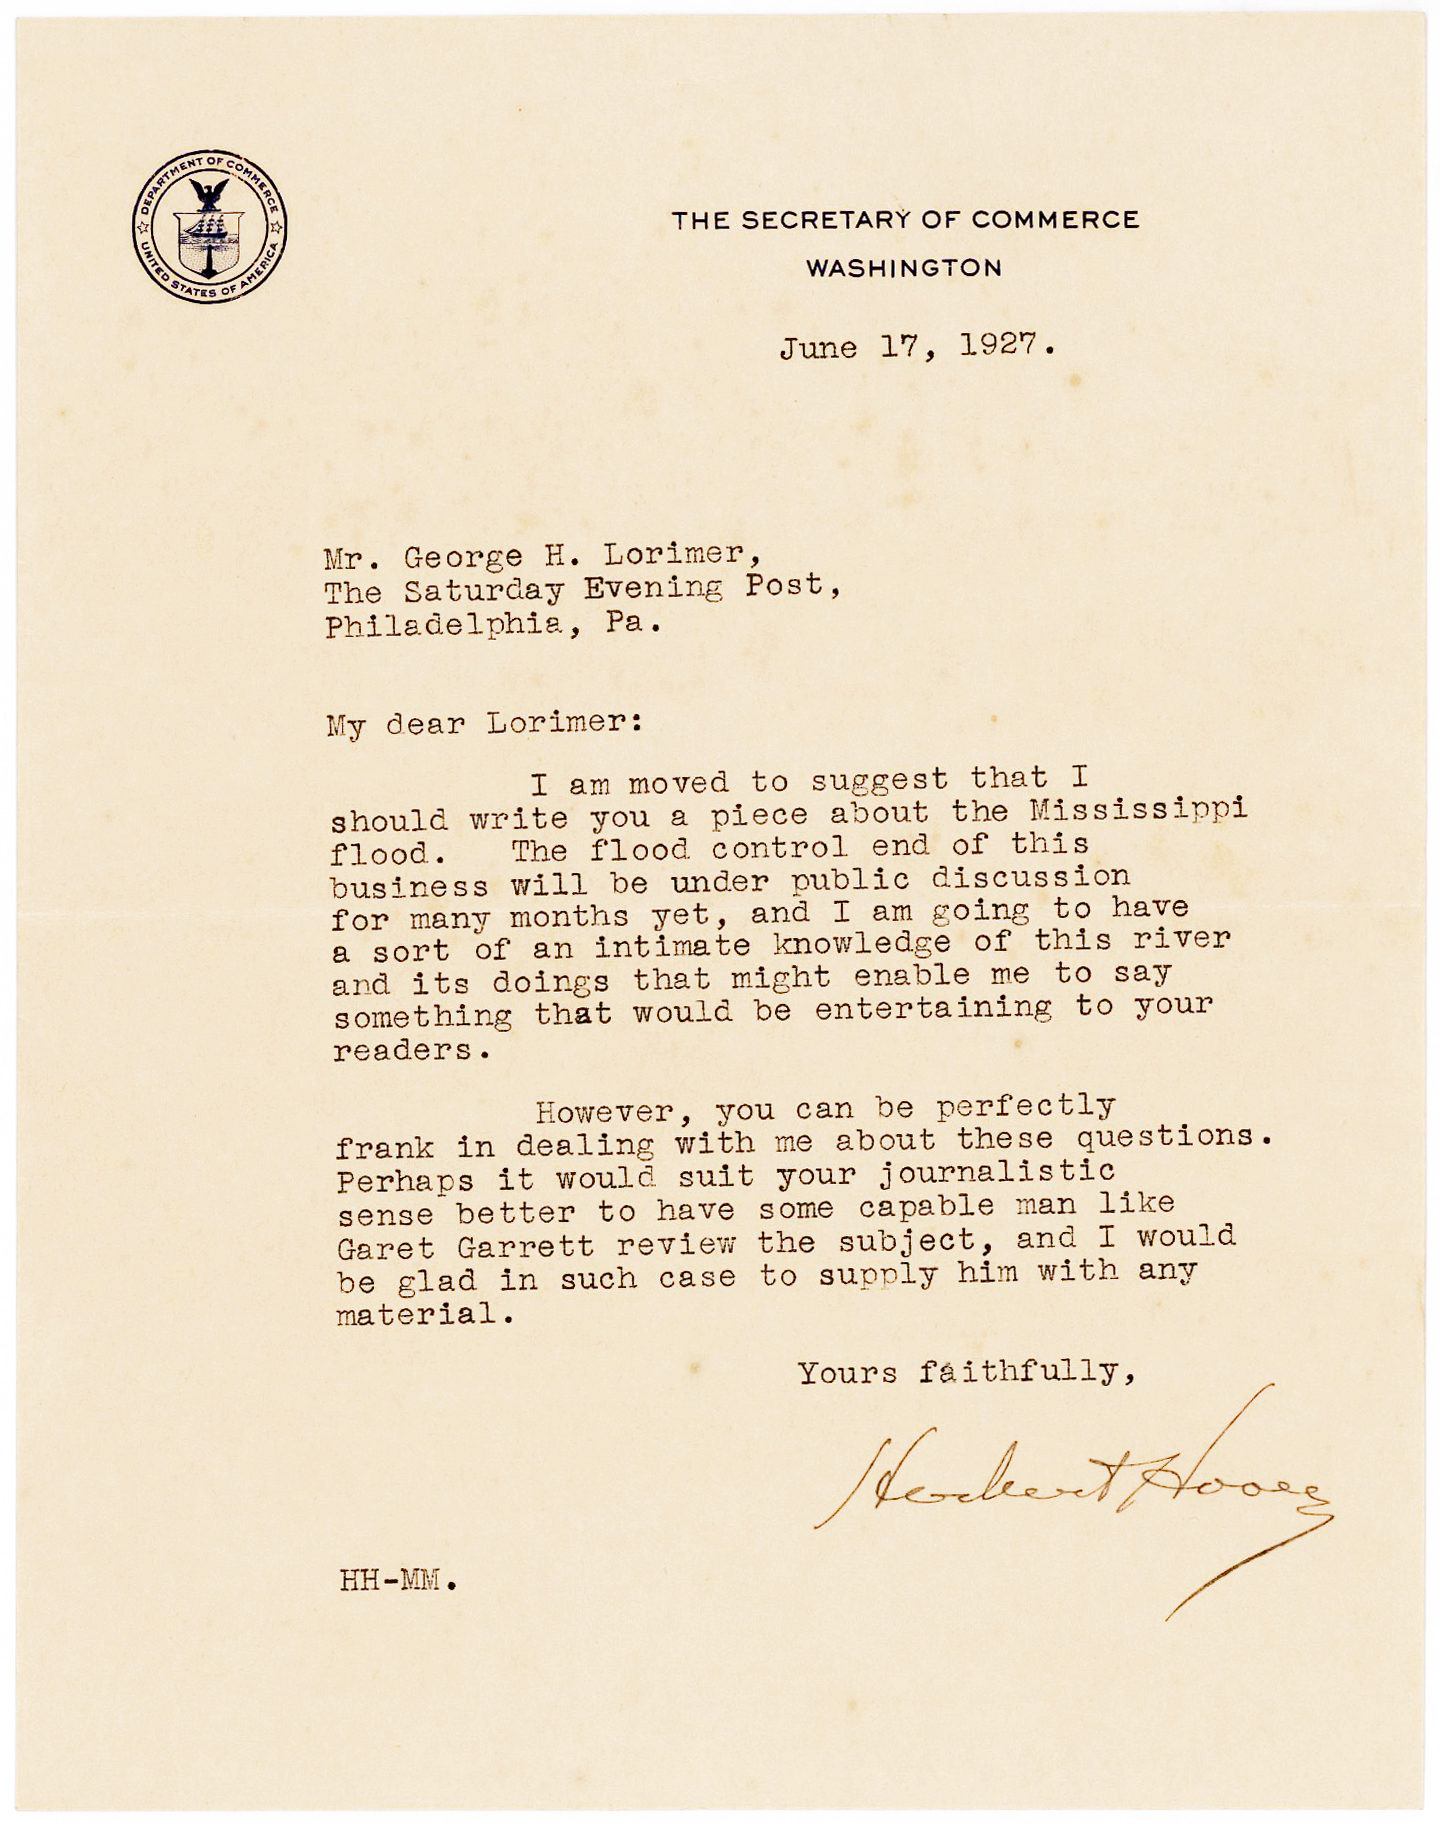 Typed Letter from Herbert Hoover about the Great Mississippi Flood of 1927, the Most Destructive River Flood in the History of the United States